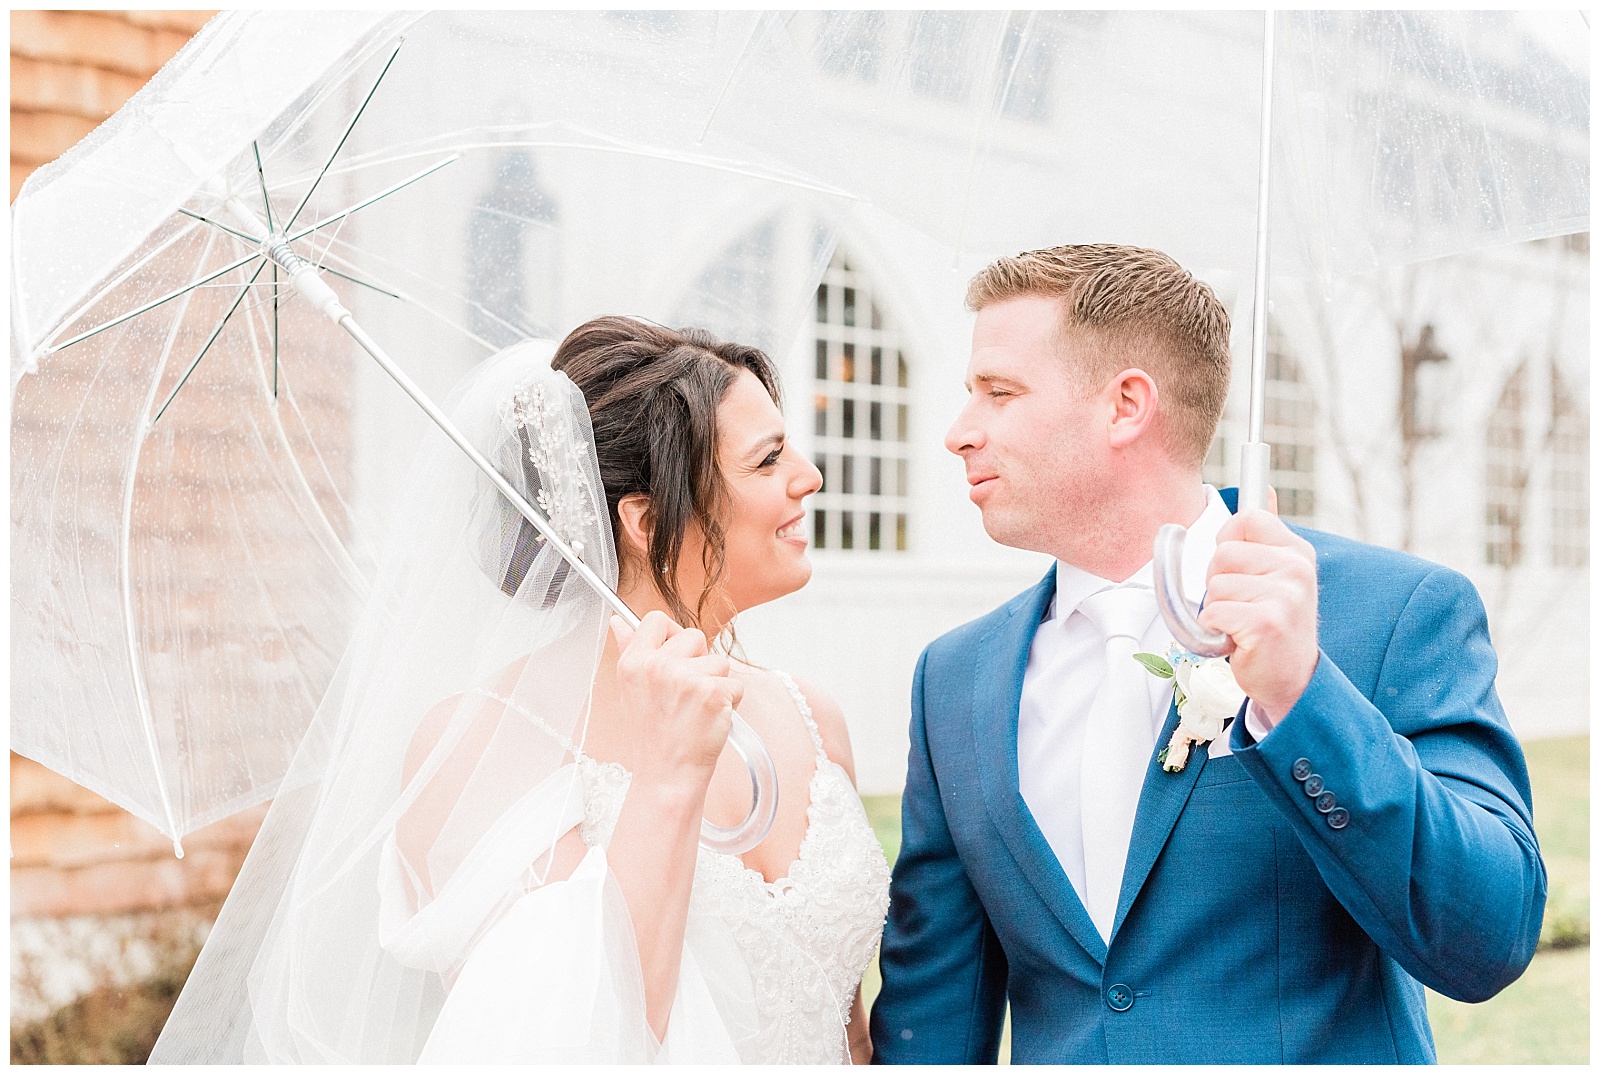 Bride and groom look at each other while holding clear umbrellas in the rain.